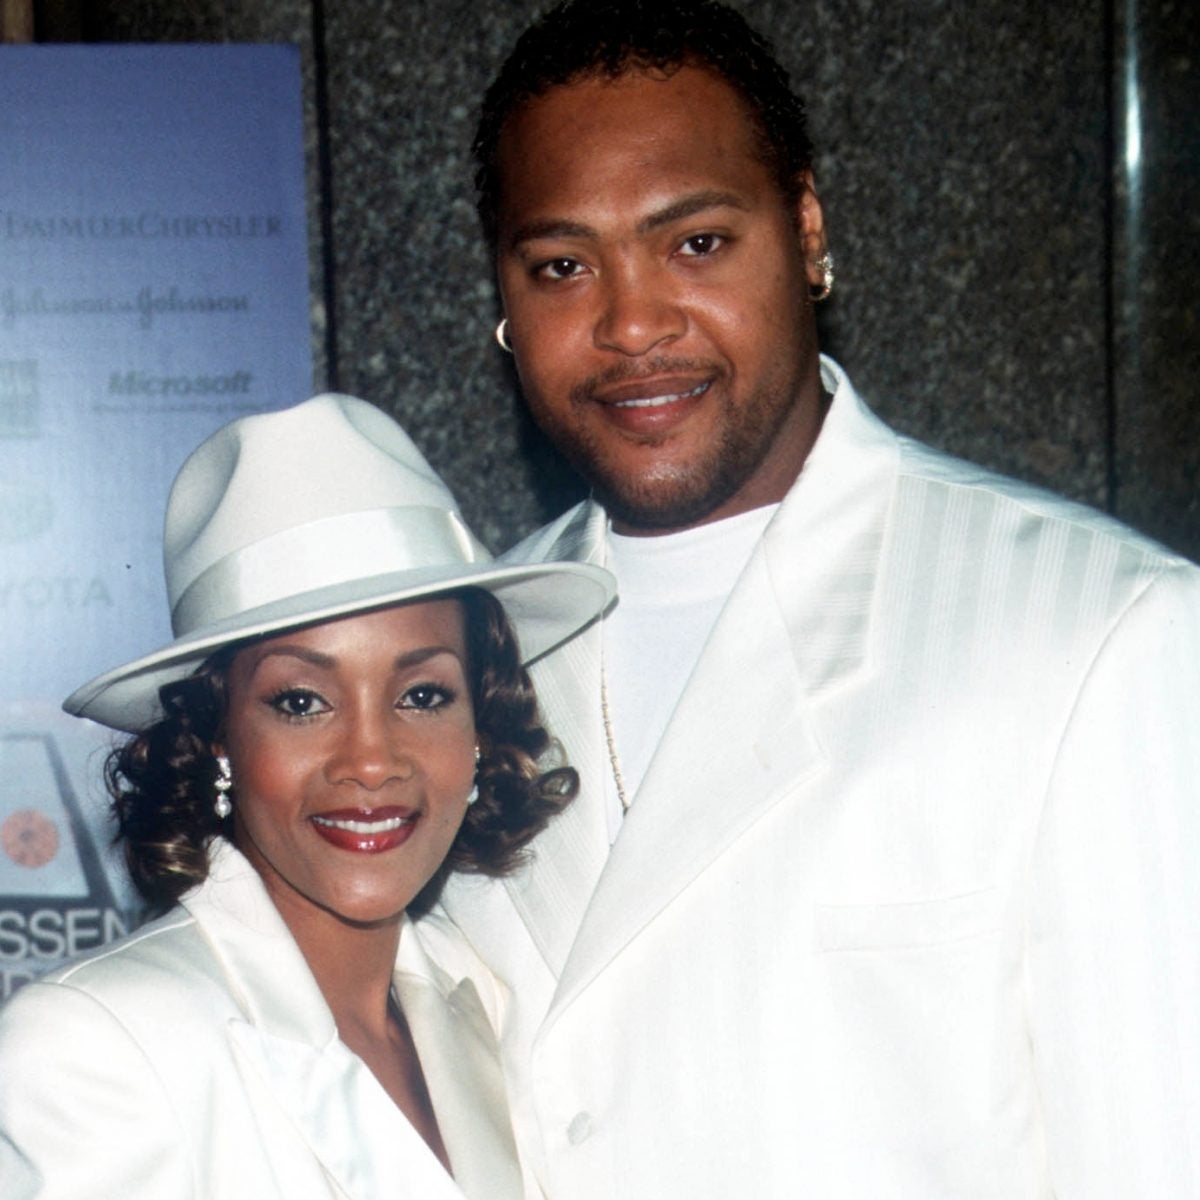 Vivica A. Fox Ended Her First Marriage Because She Was Paying All The Bills: 'I Didn't Want To Be The Breadwinner'